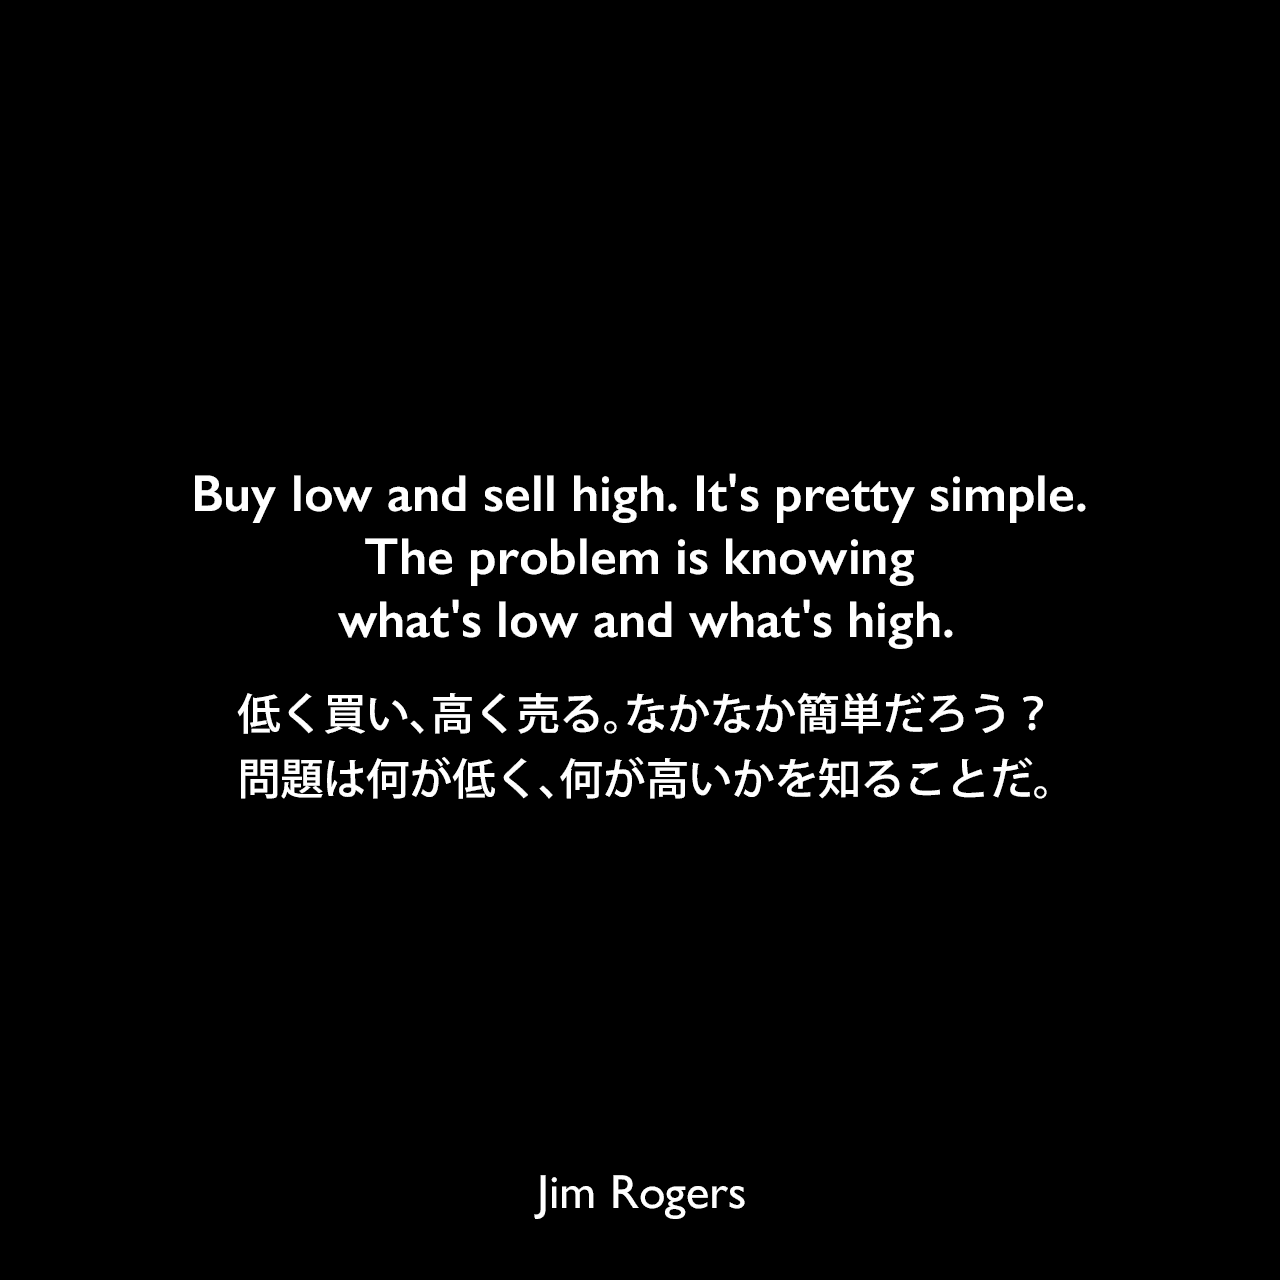 Buy low and sell high. It's pretty simple. The problem is knowing what's low and what's high.低く買い、高く売る。なかなか簡単だろう？問題は何が低く、何が高いかを知ることだ。Jim Rogers